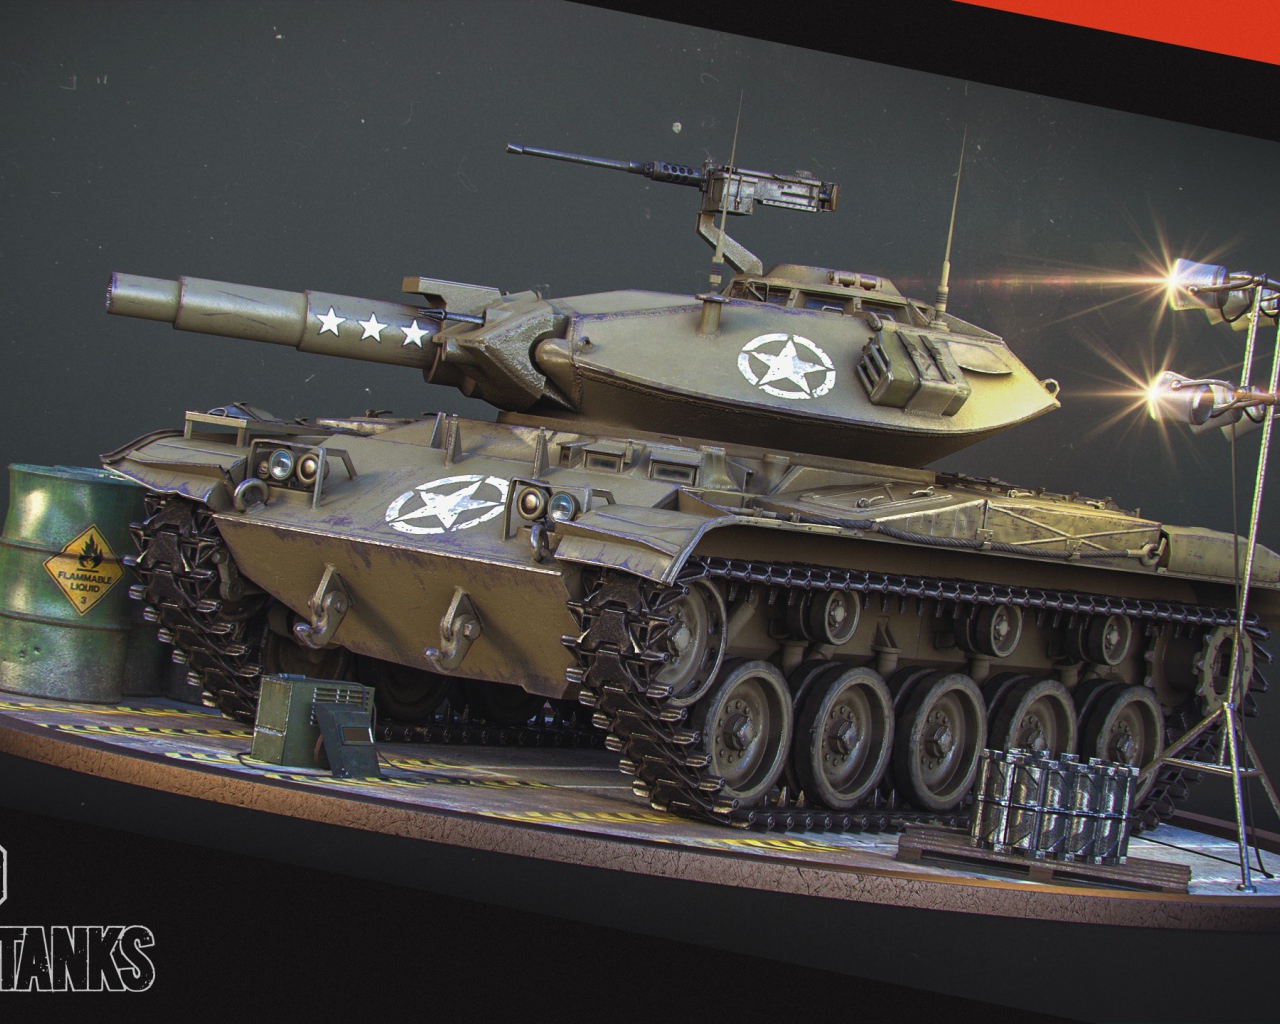 The game World of Tanks, tank T-49